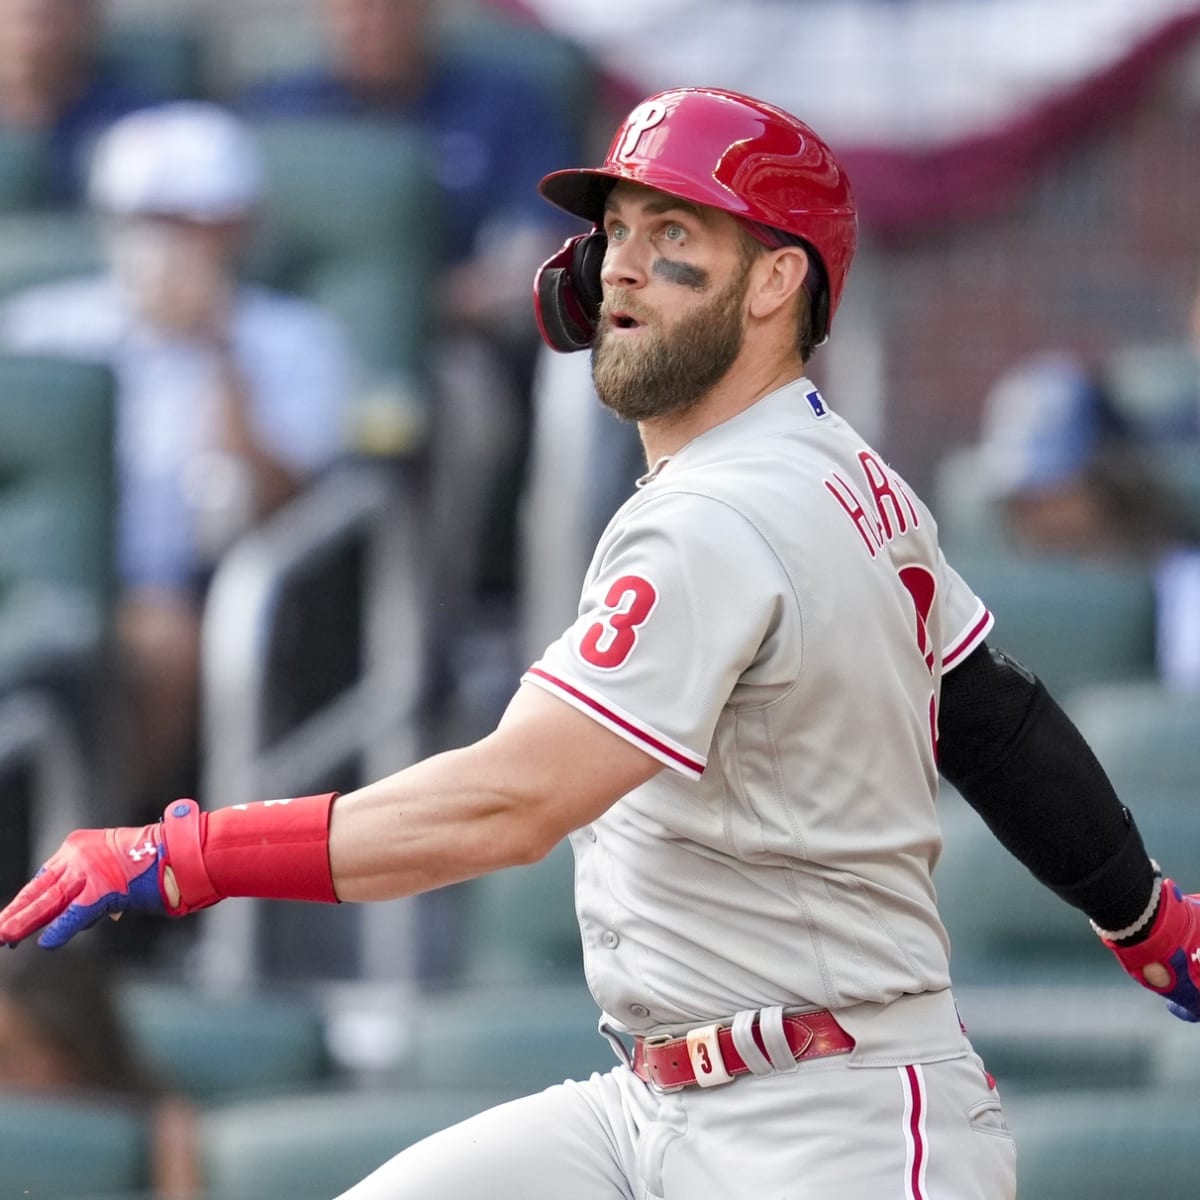 Phillies release Wild Card roster with one notable exclusion